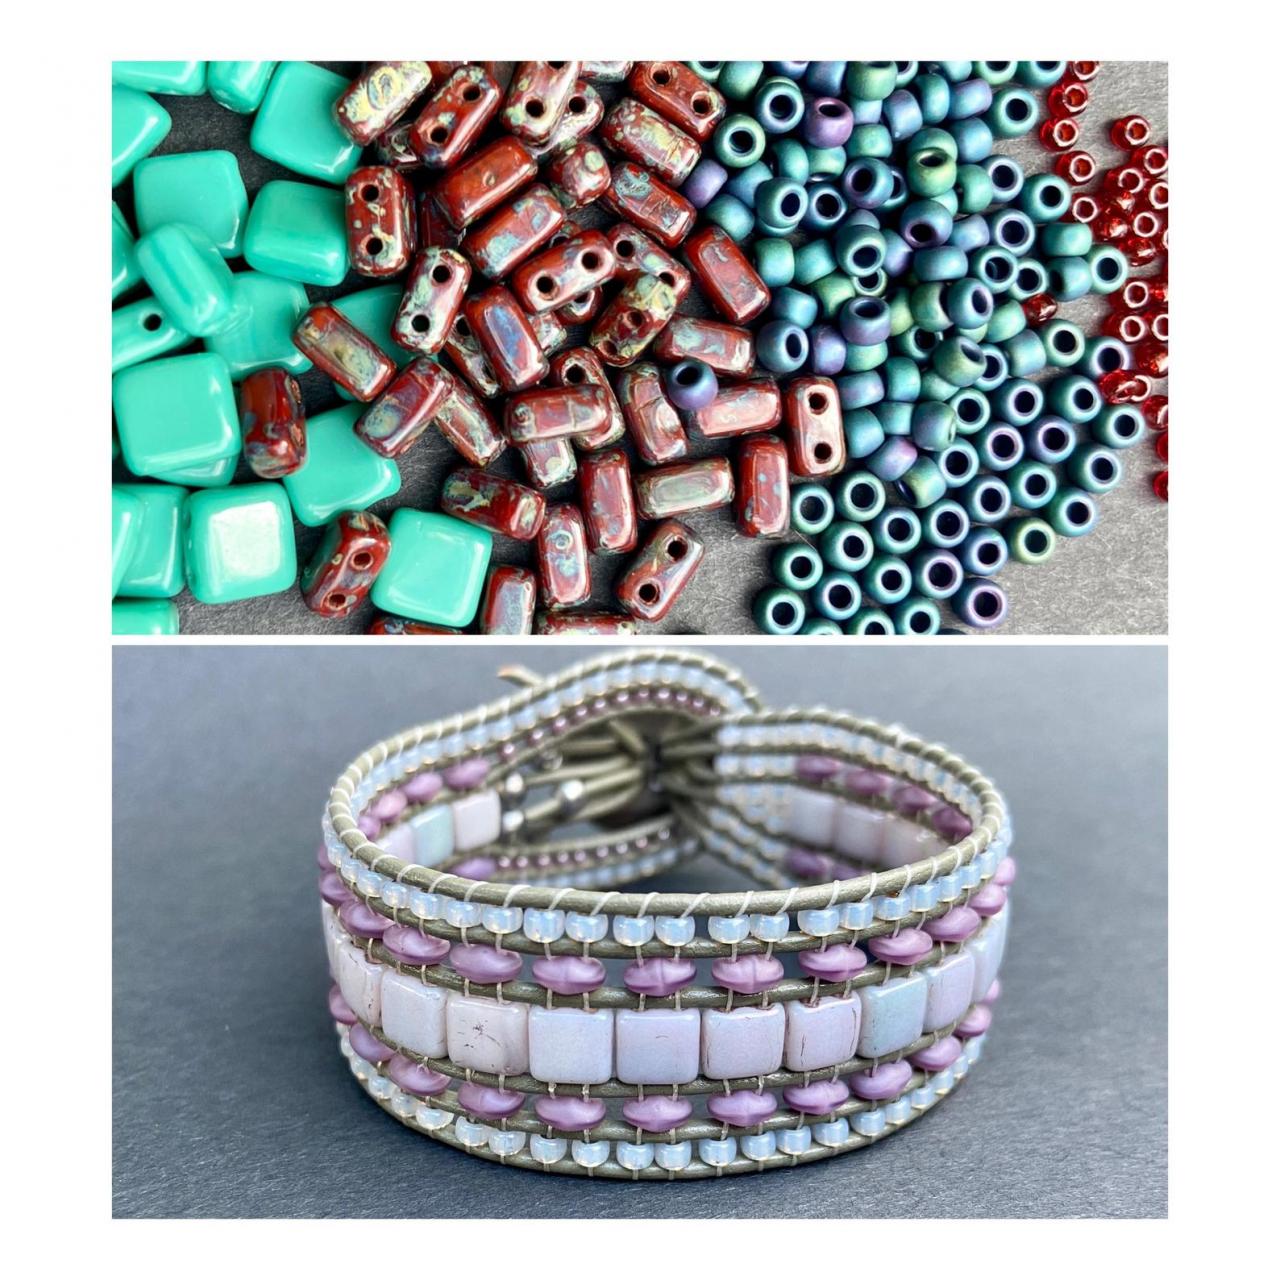 Kit Picasso Coral Teal Metallic Wide Leather Beaded Cuff Kit By Leila Martin Bohemian Diy Intermediate Instructions Complete No Tools